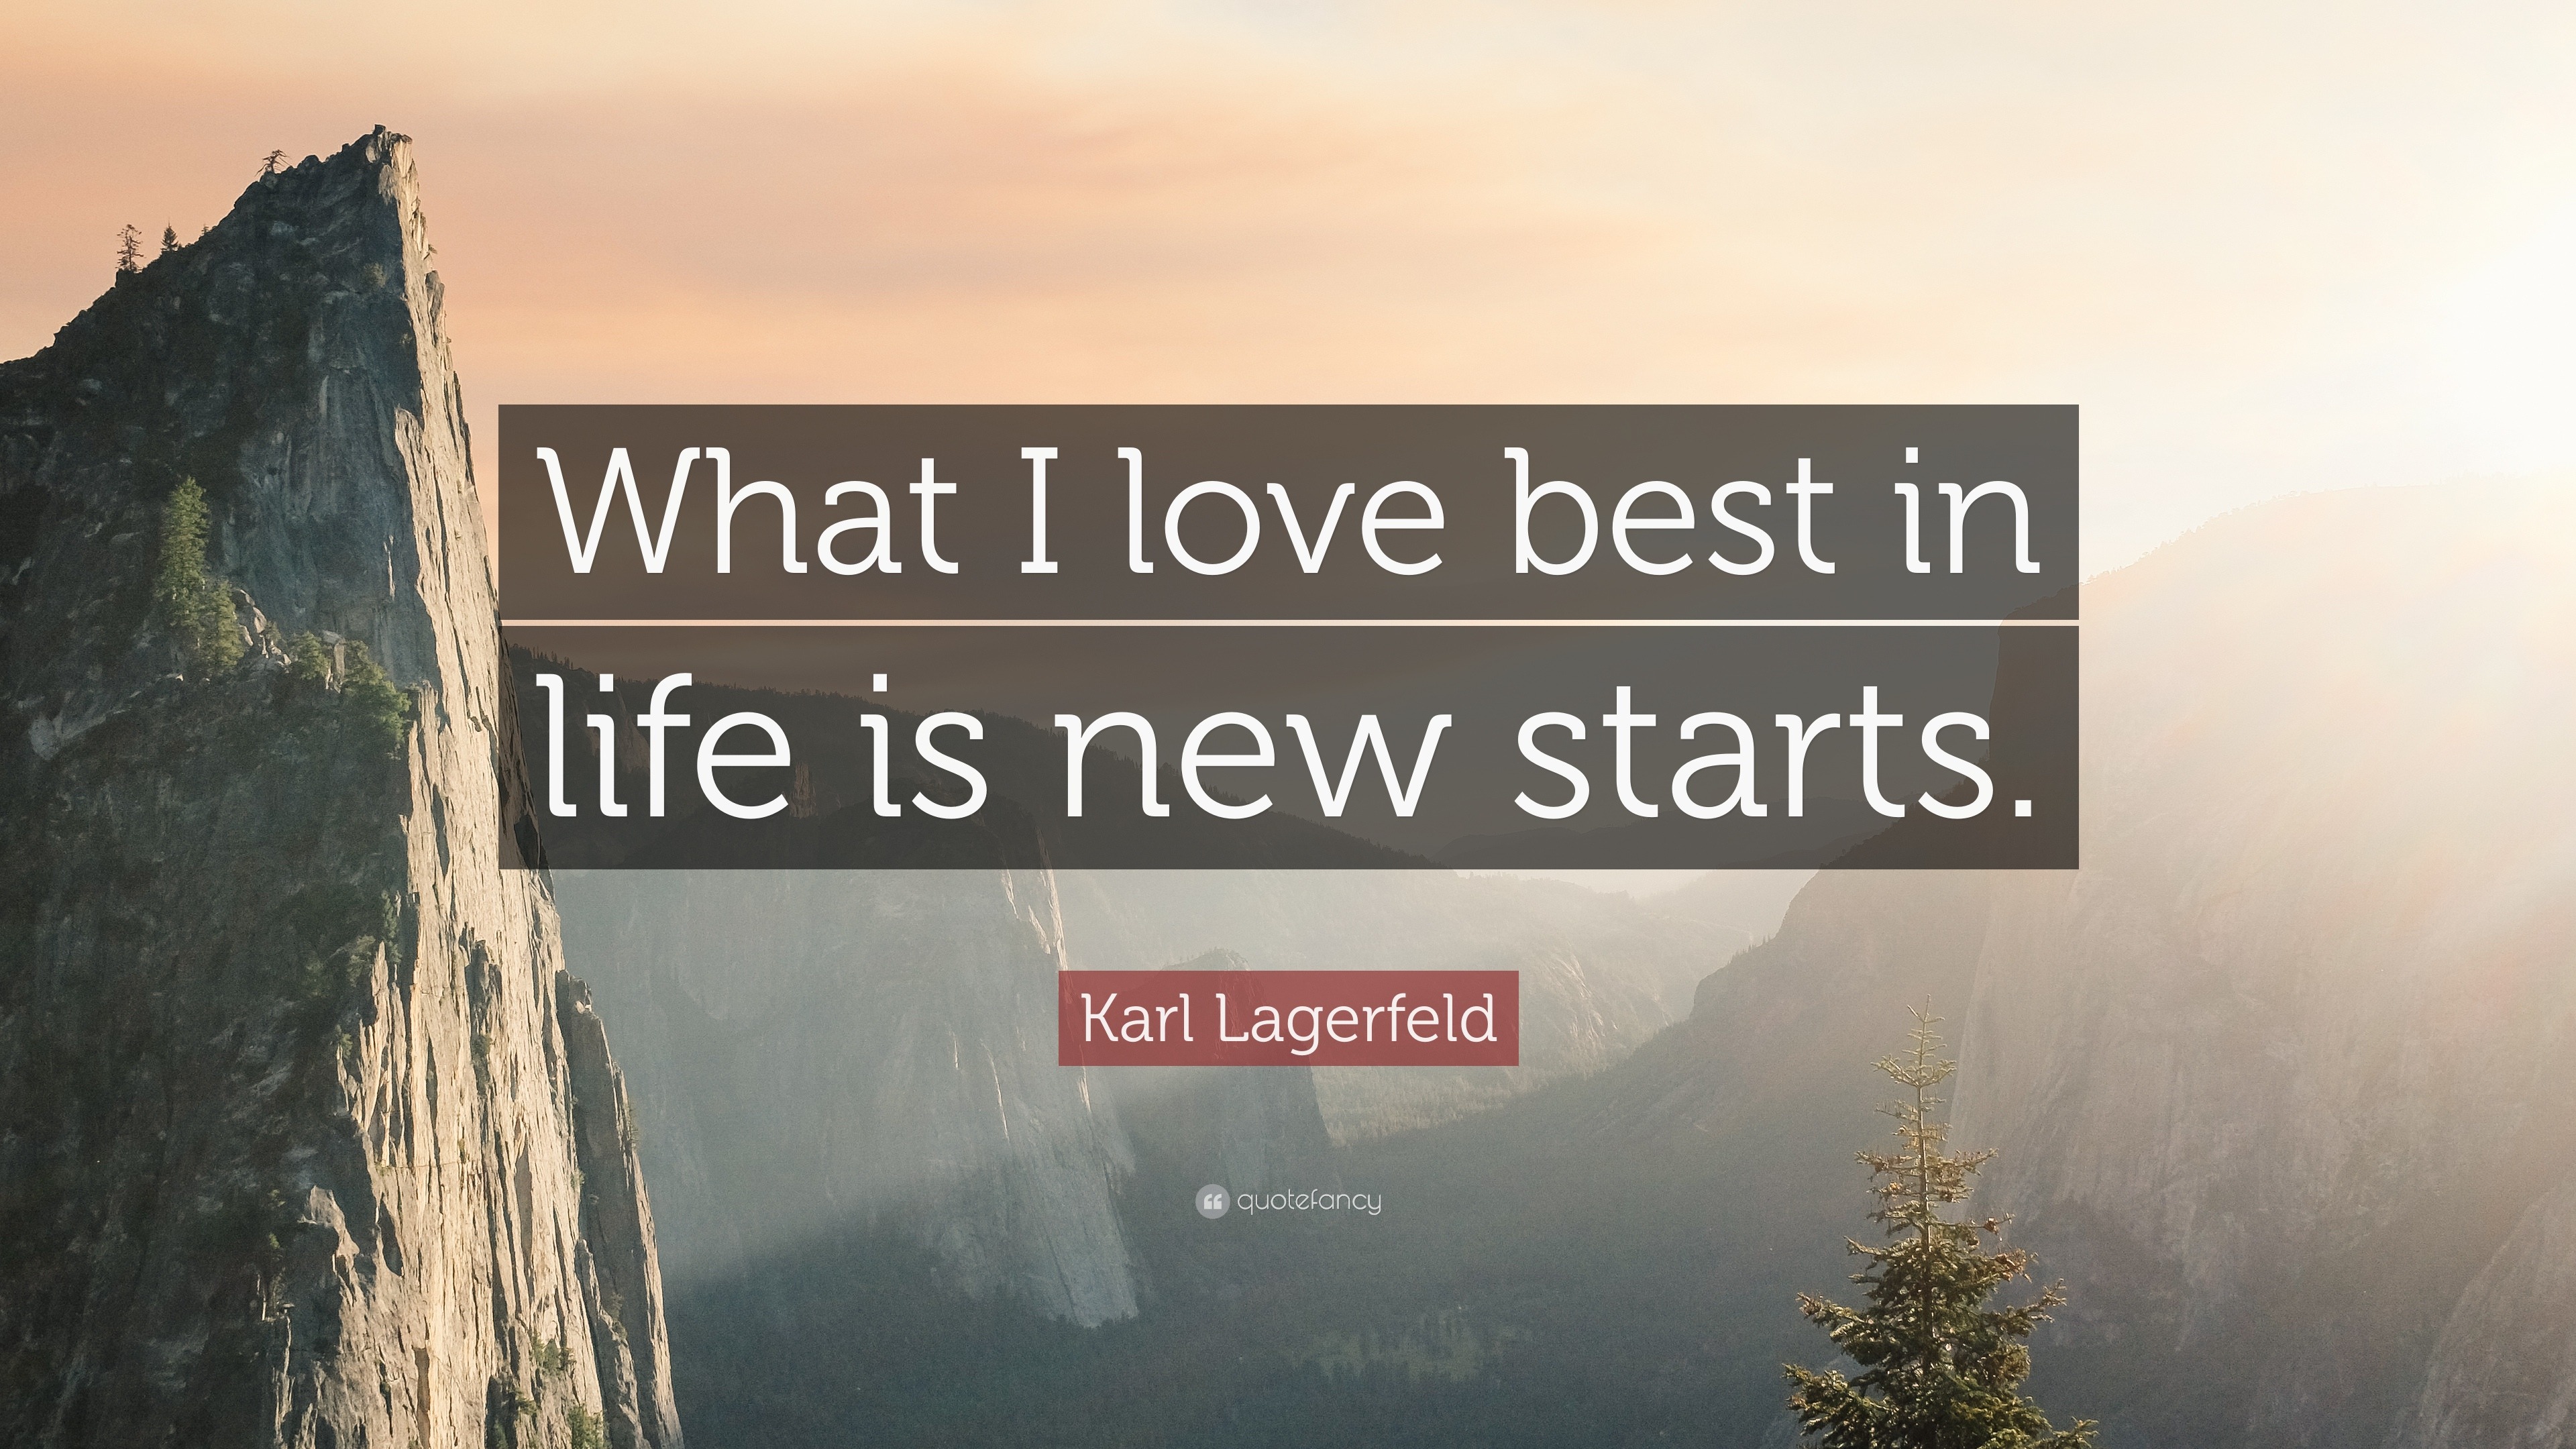 Karl Lagerfeld Quote “What I love best in life is new starts ”